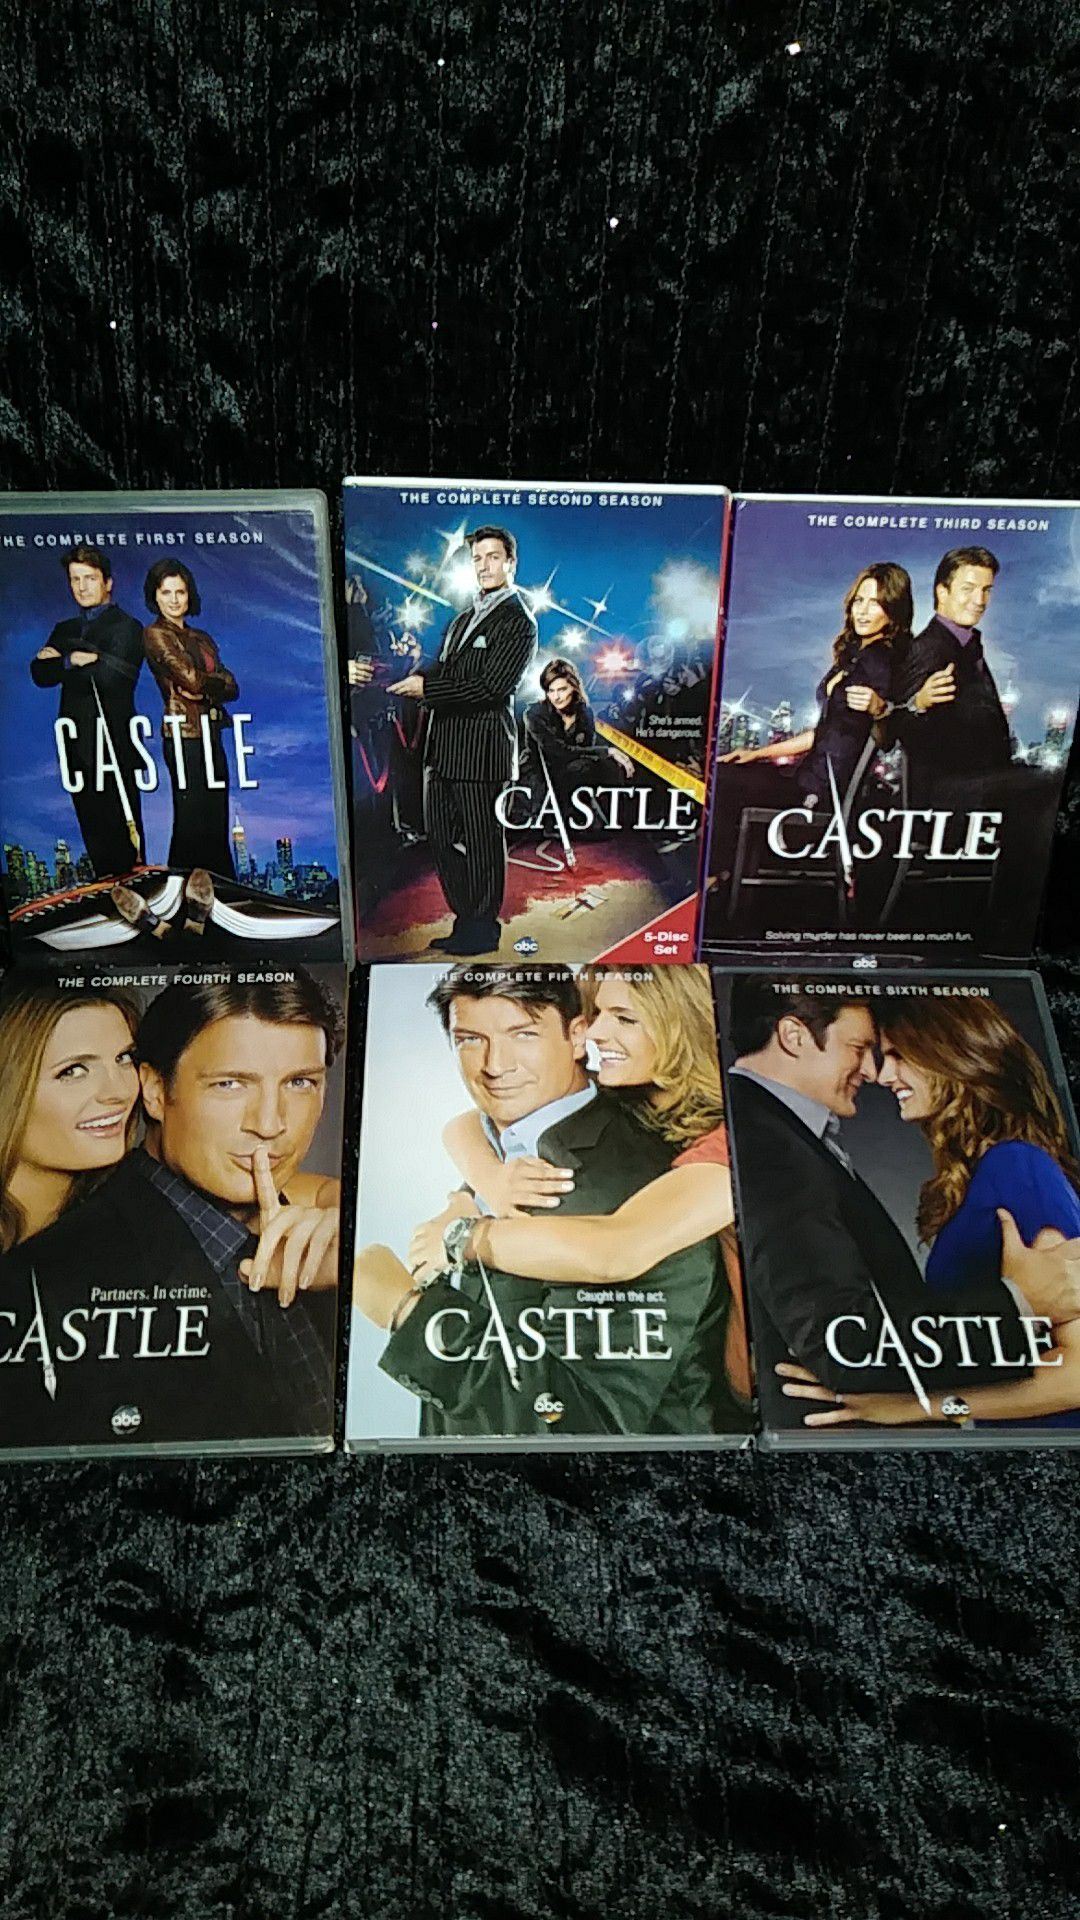 Castle series on Dvd seaons 1 - 6